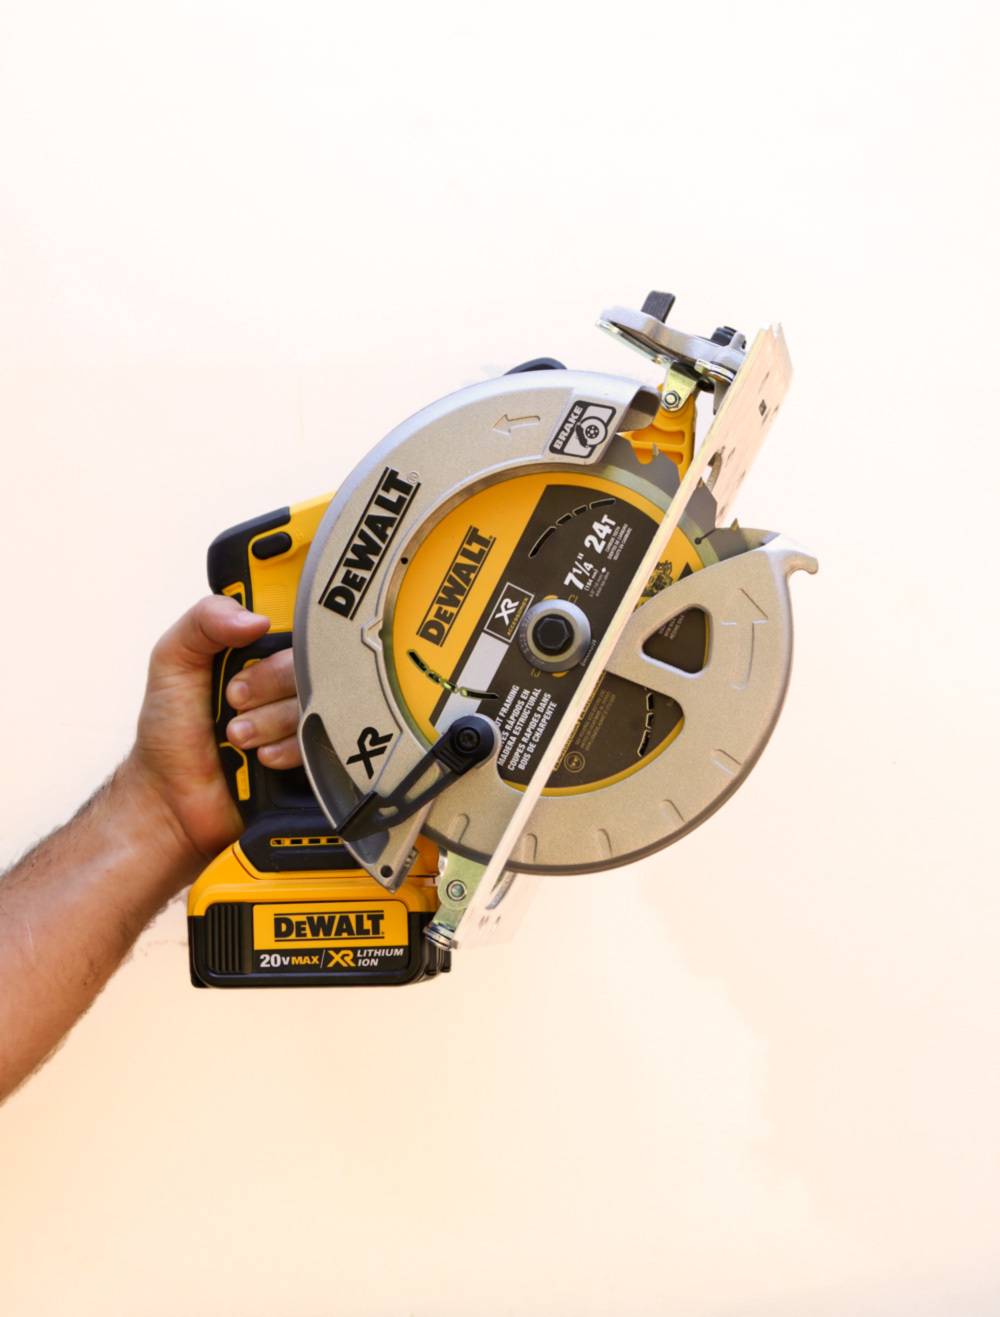 Power Tools 101: How to Use a Circular Saw